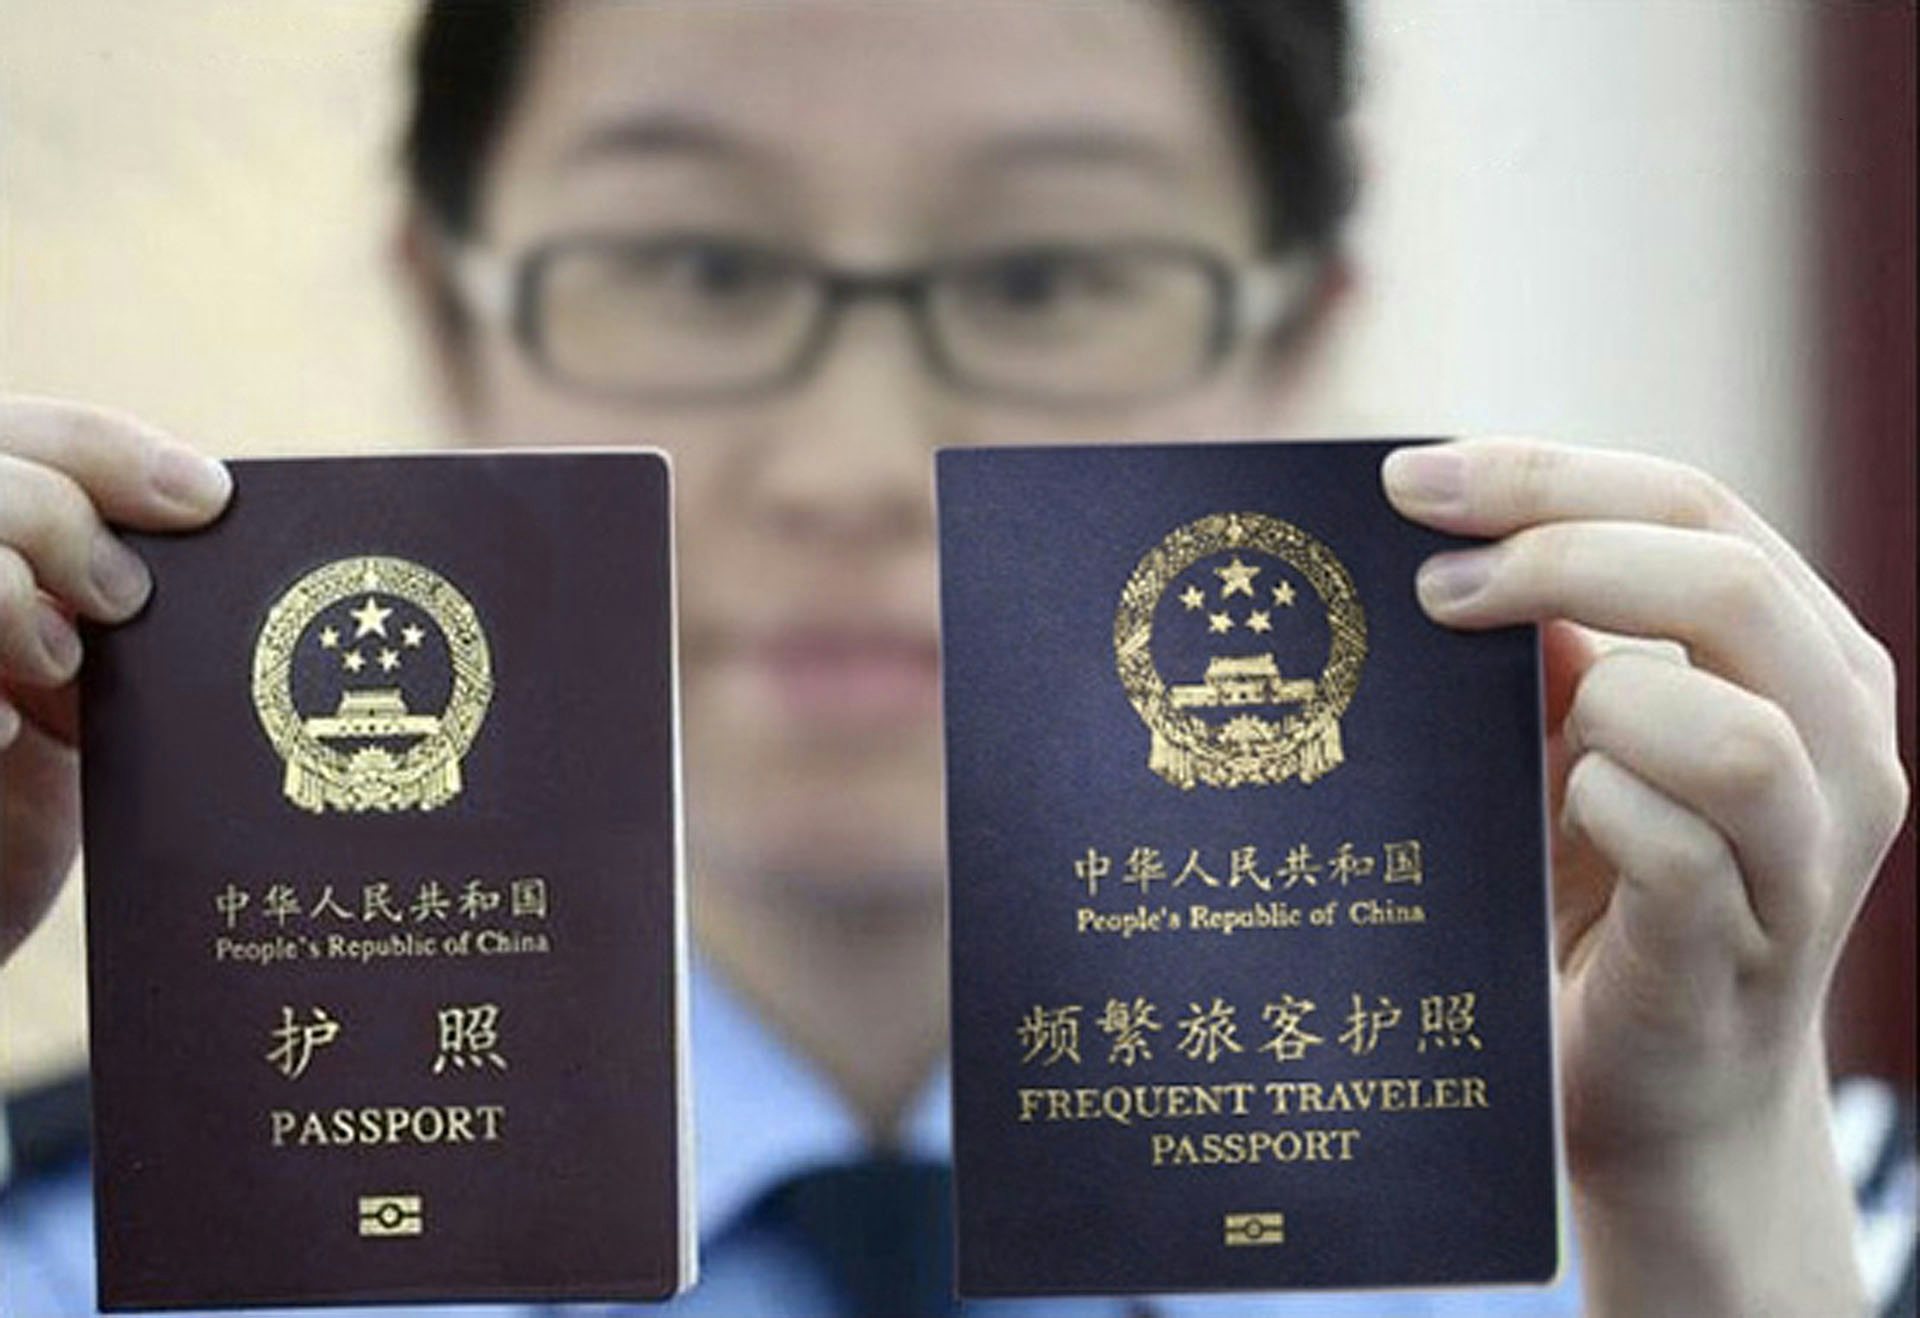 The edited image that accompanied the story shows a new "frequent traveler passport" next to the ordinary Chinese passport.